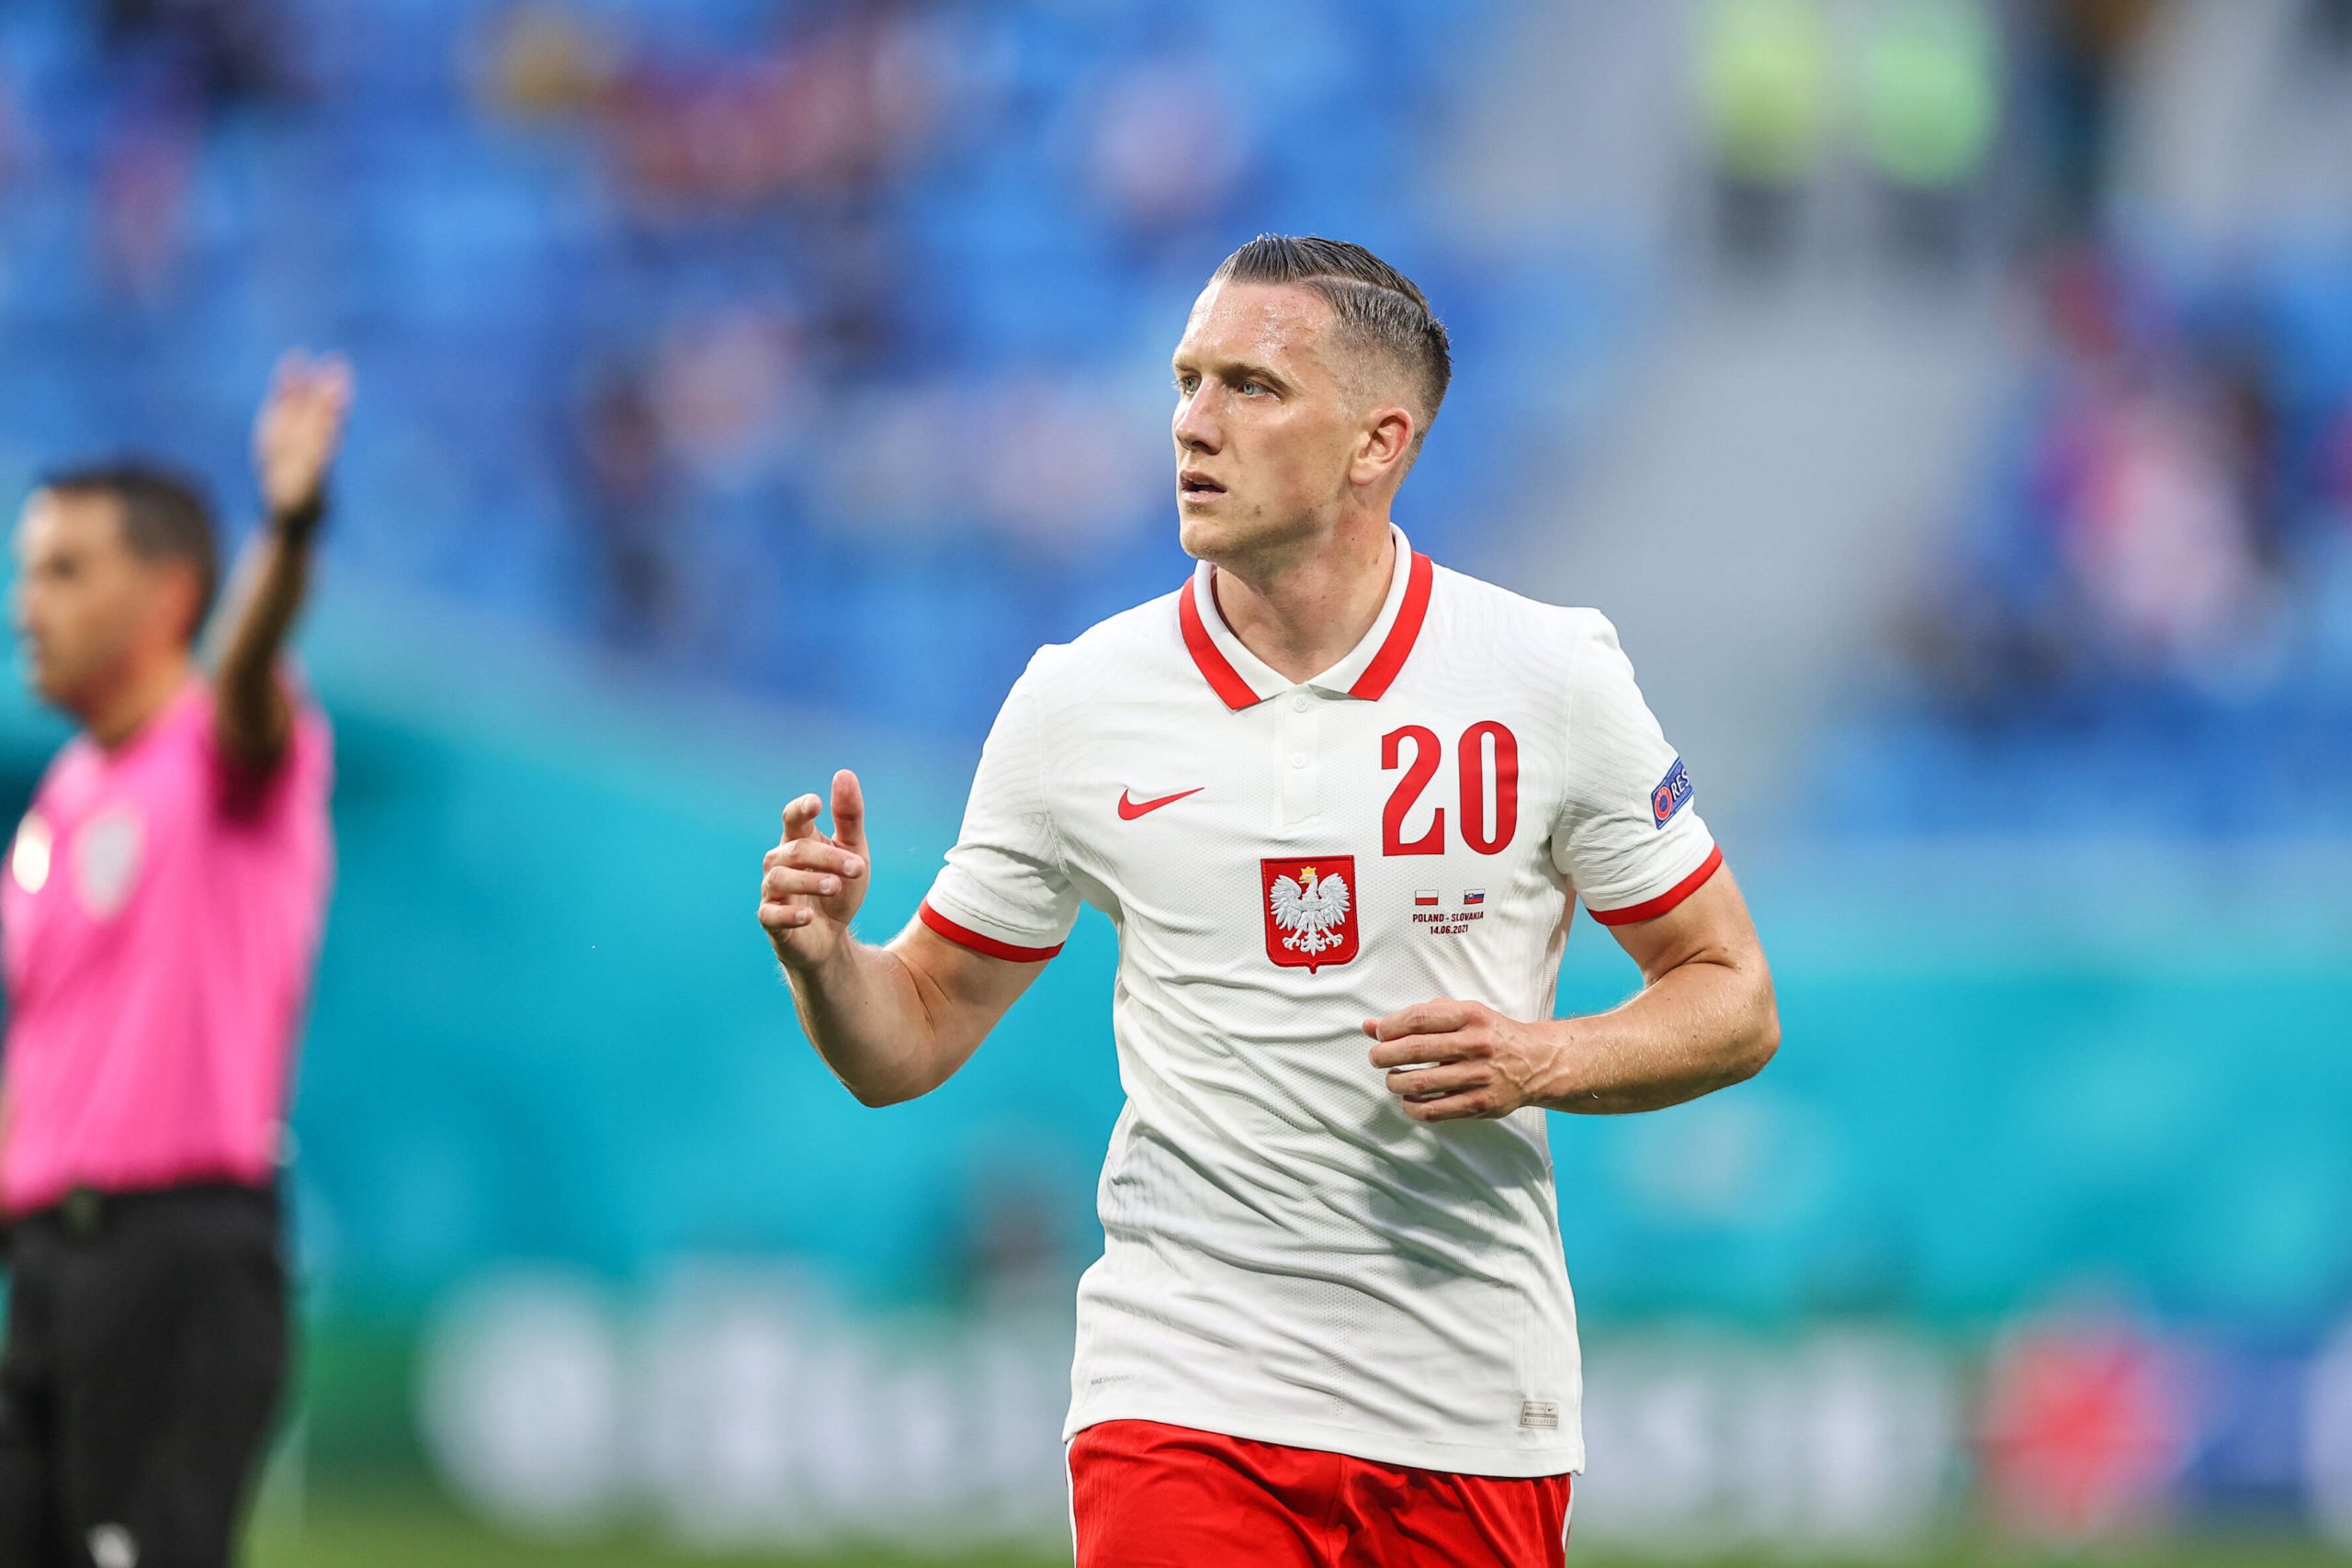 Liverpool to rival Manchester City for Zielinski who is seen in the picture